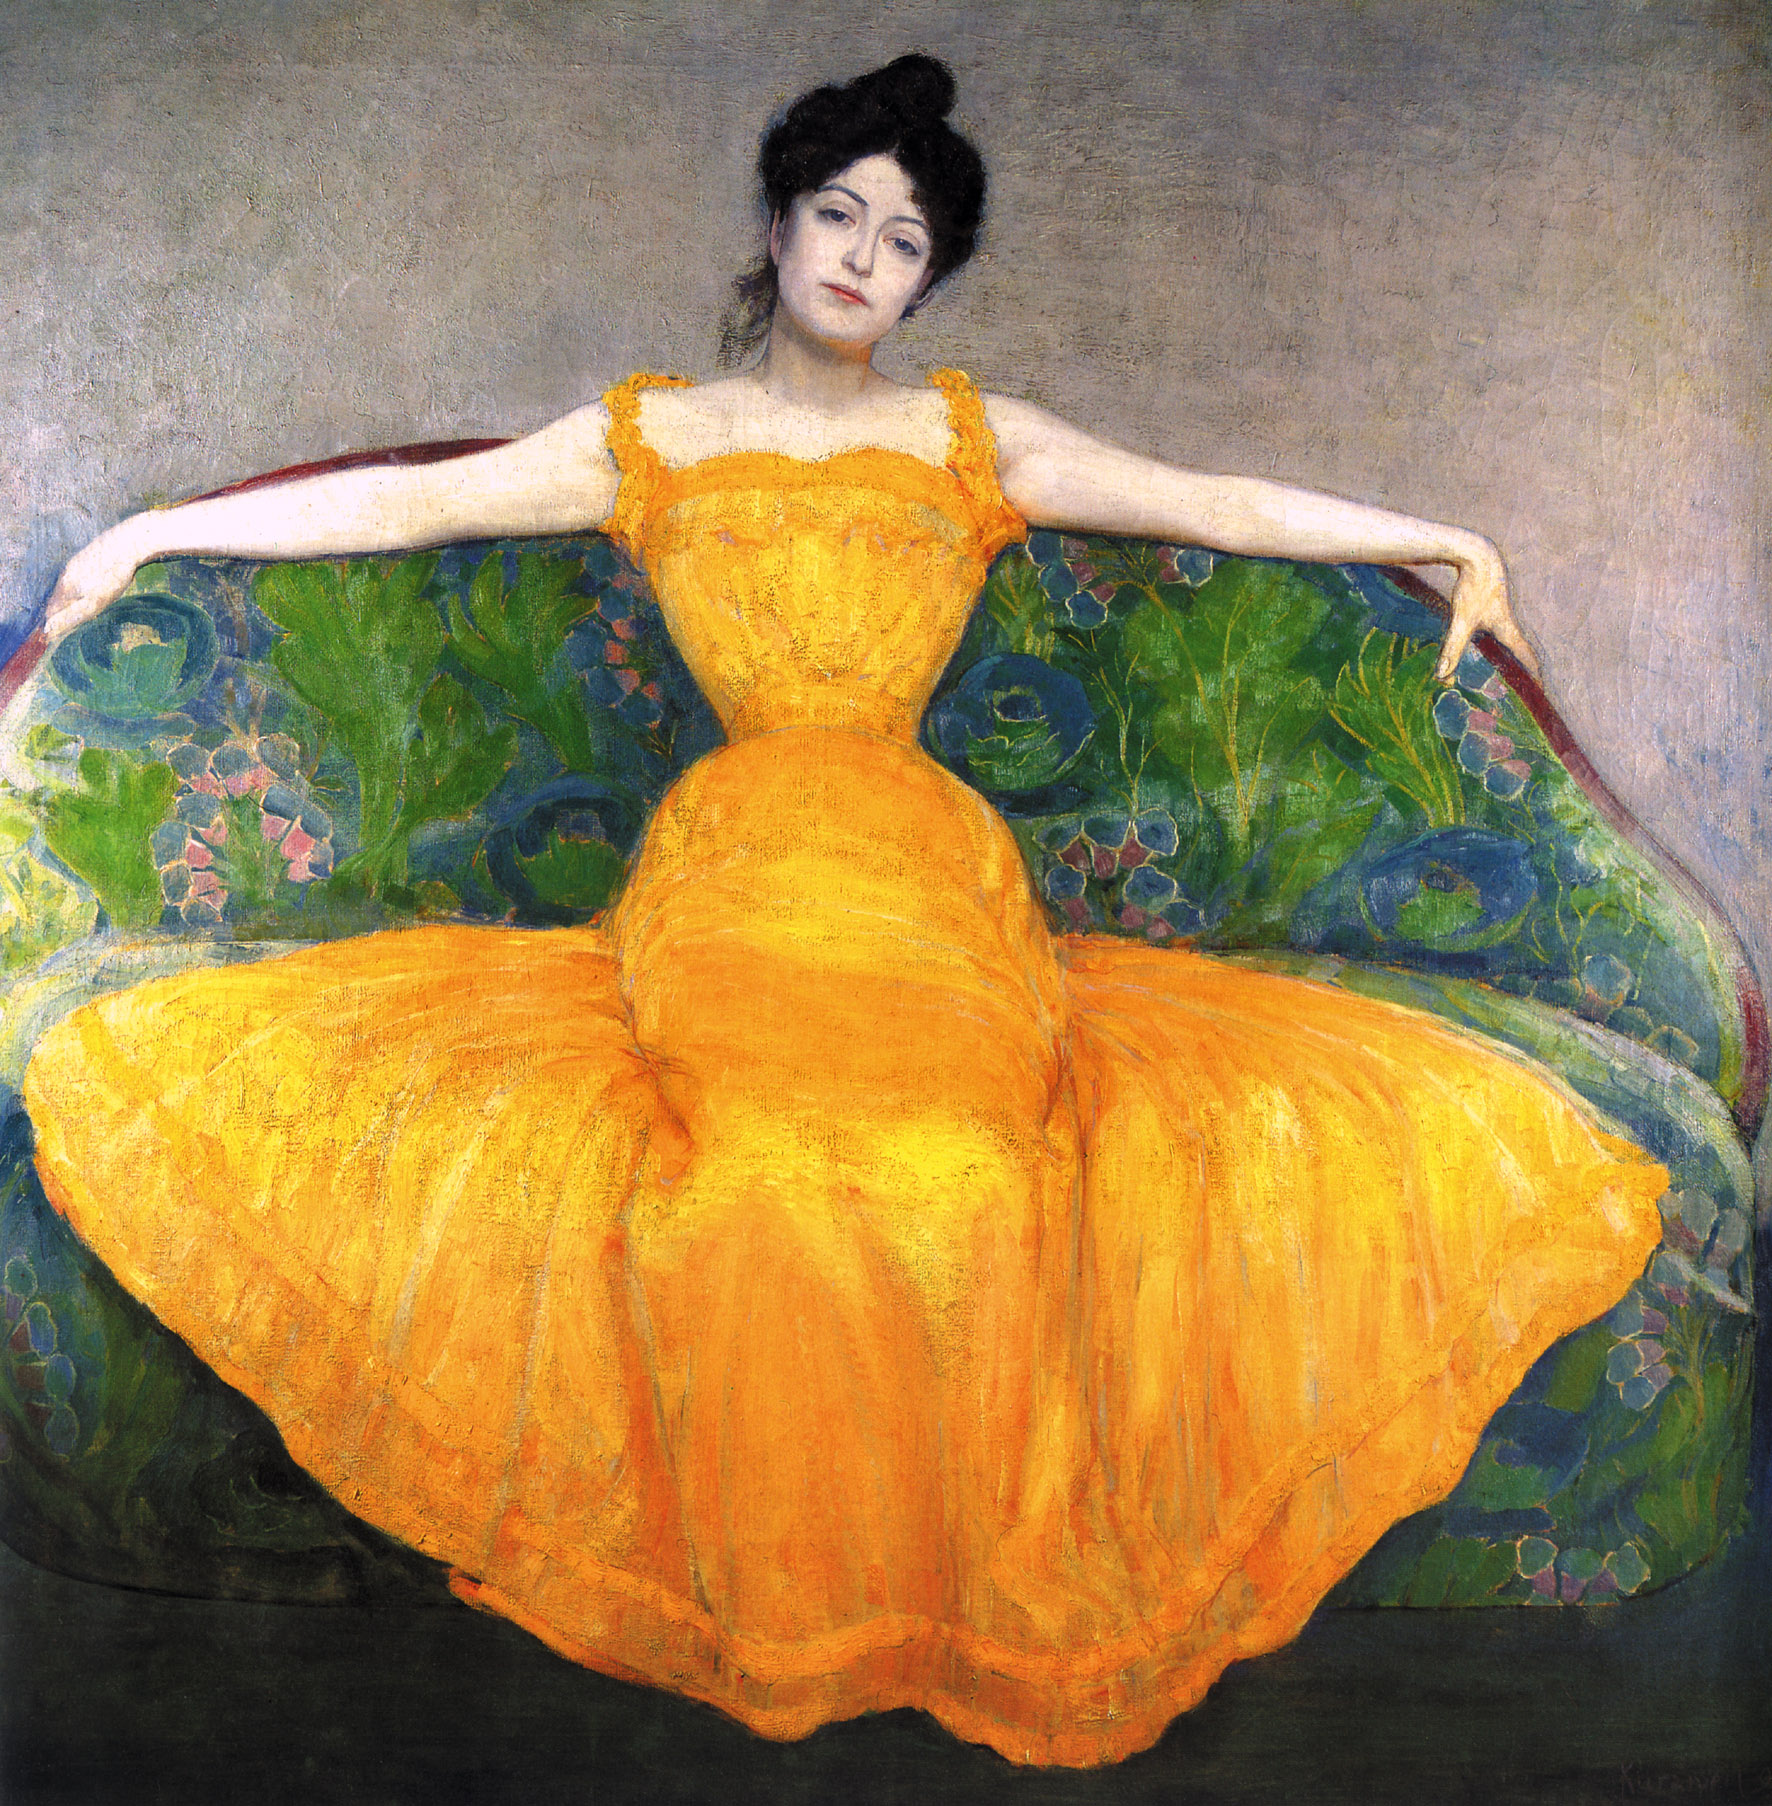 Lady in a yellow Dress - Max Kurzweil as art print or hand painted oil.